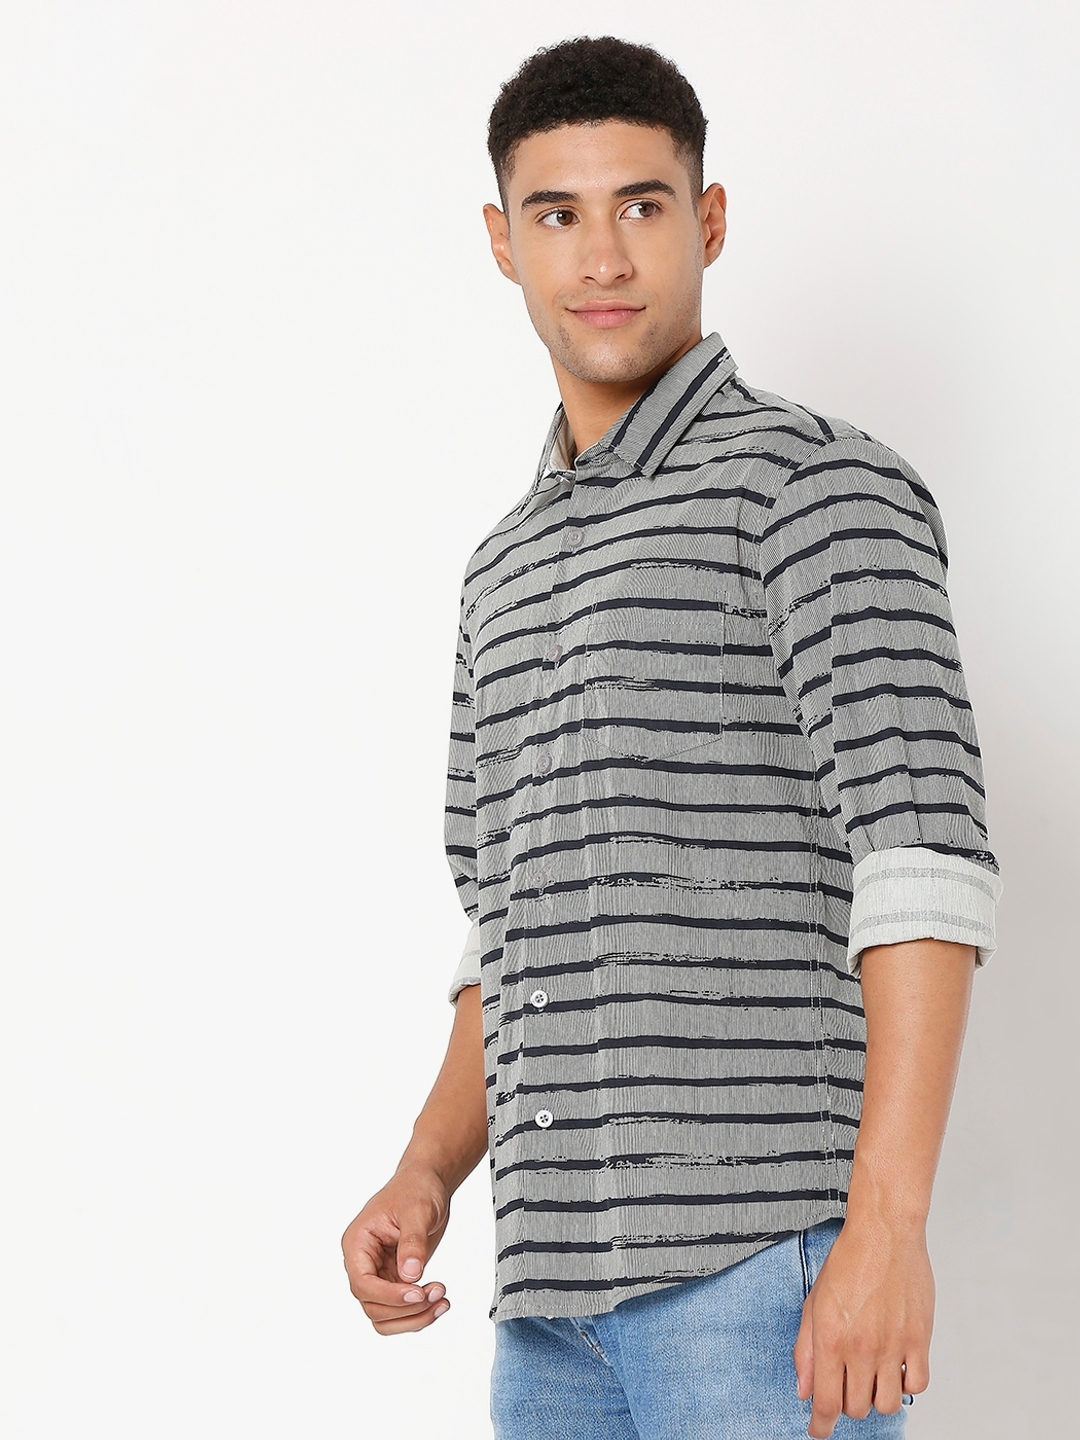 Caio Stroke Relaxed Fit Shirt